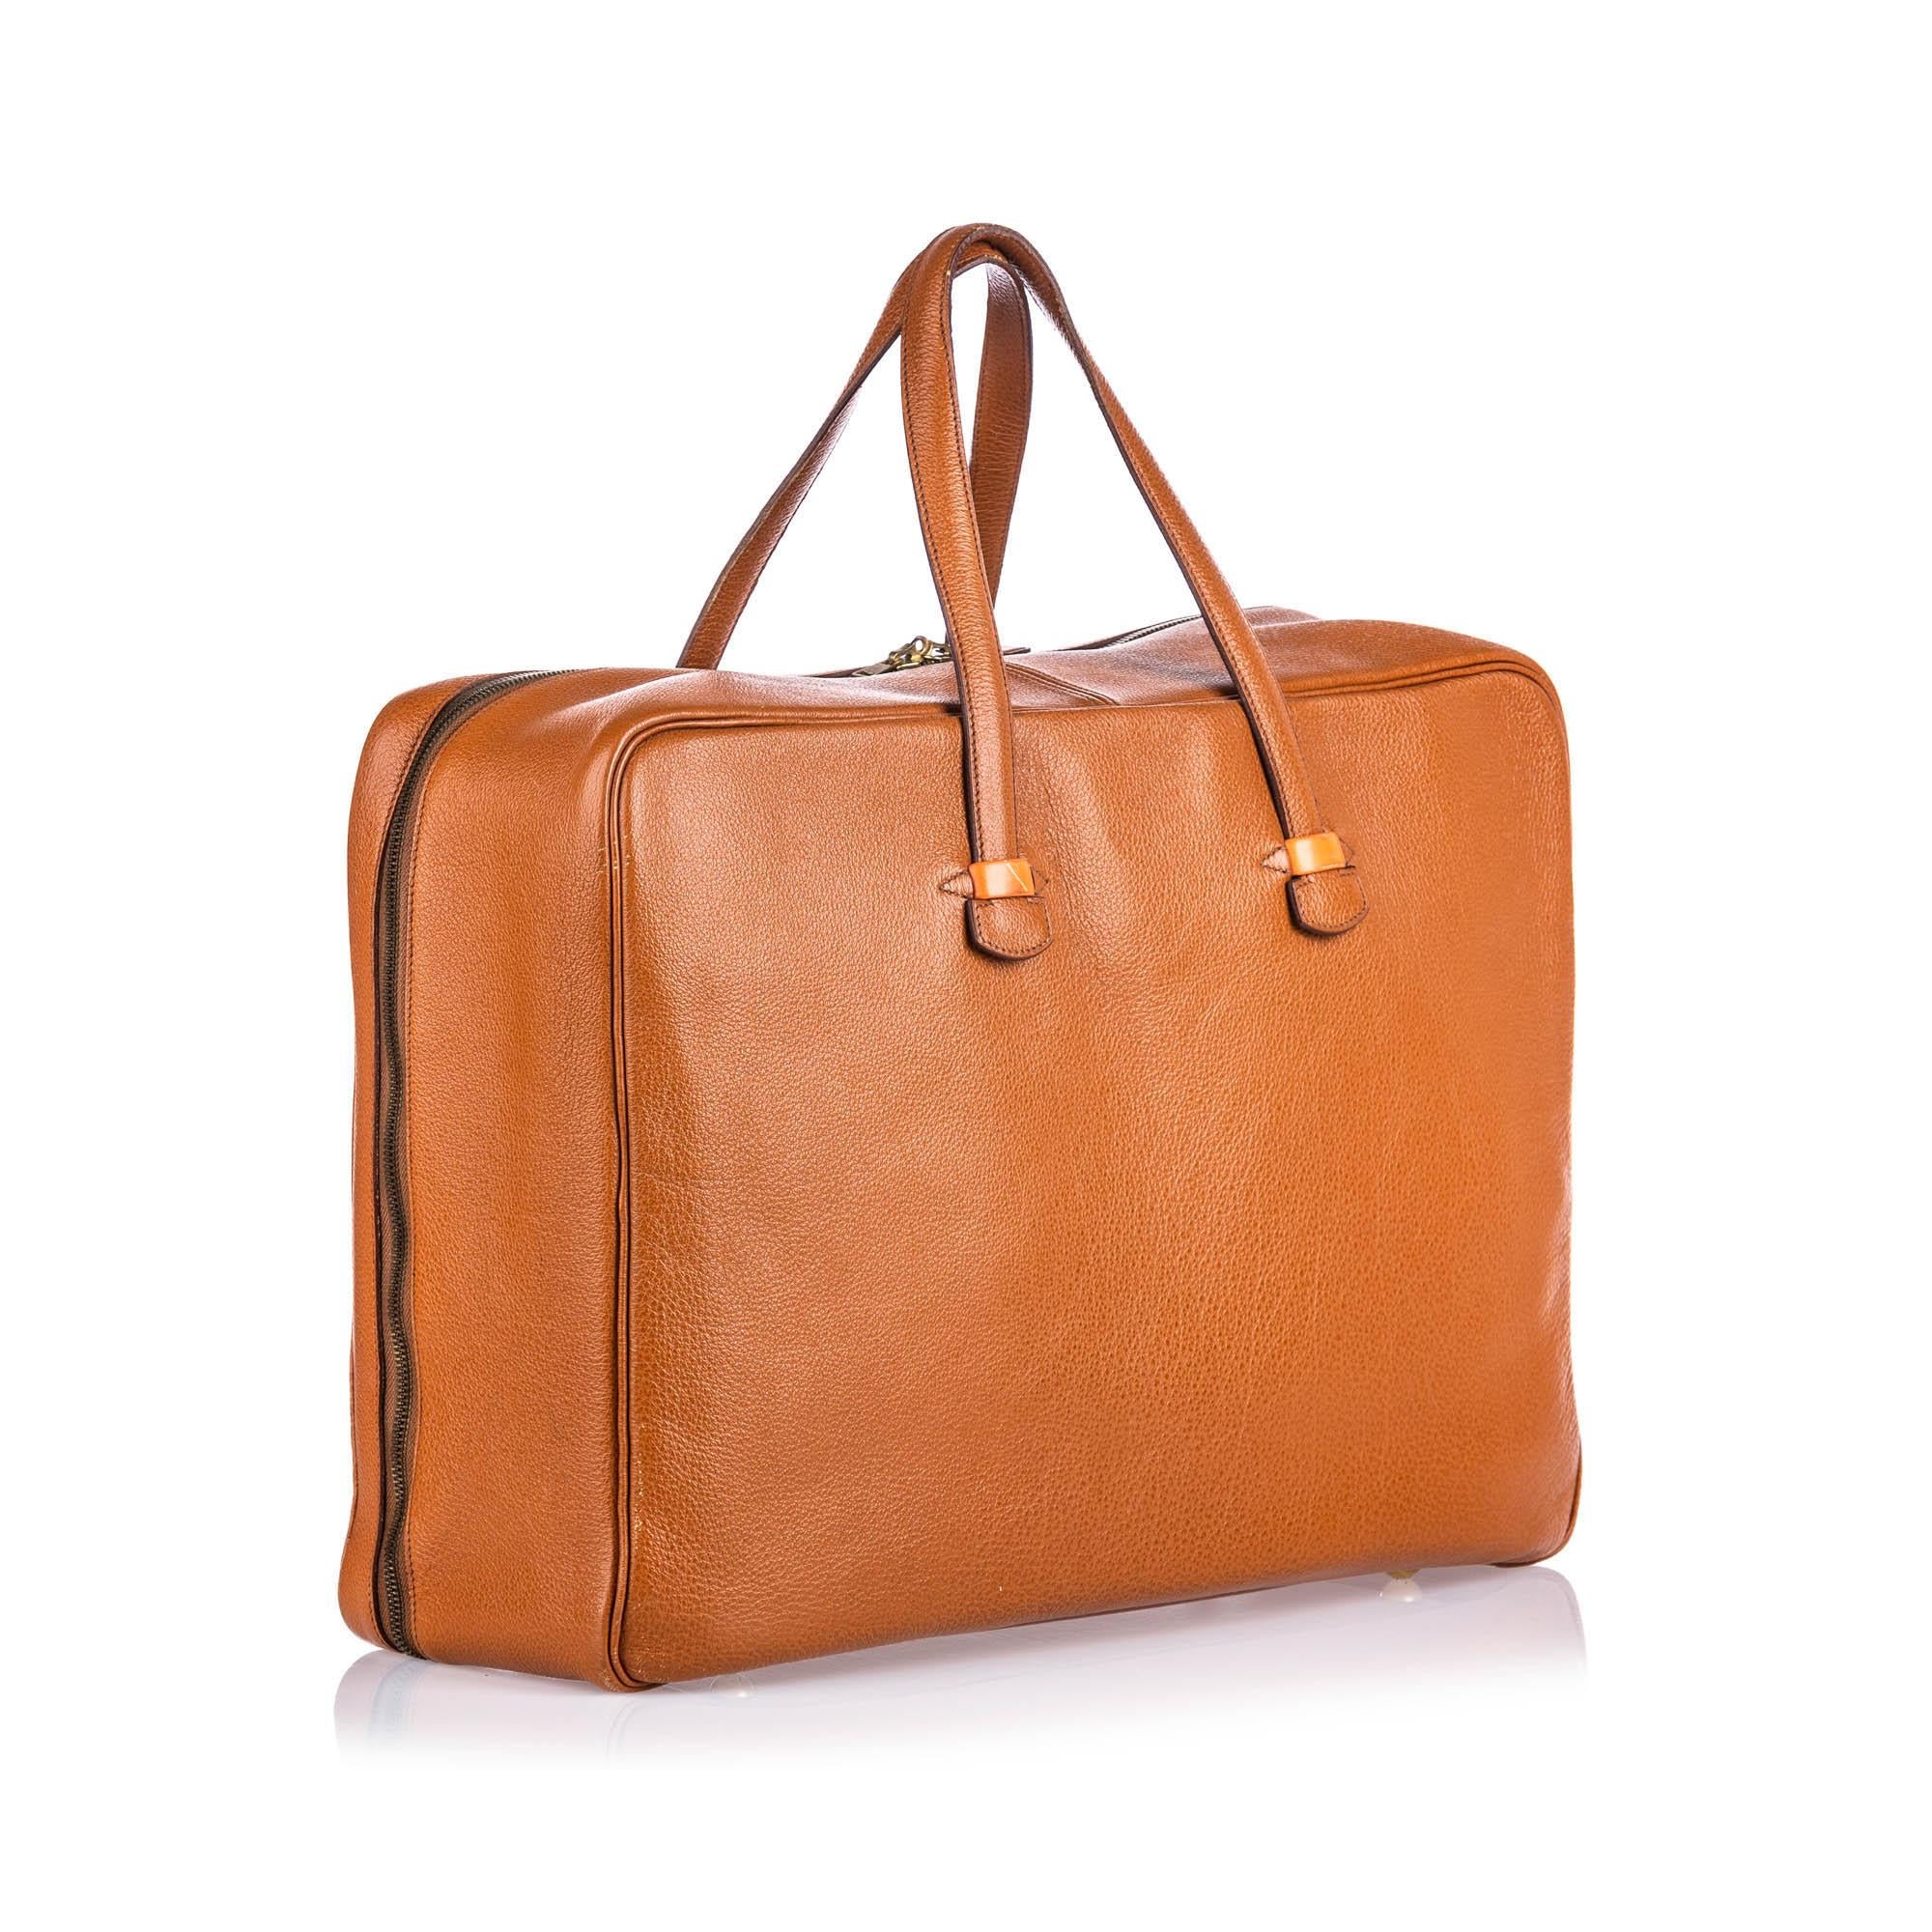 The Valise Galop 50 features a leather body, flat leather strap, a zip around closure, interior zip pocket, and an interior elastic straps. It carries as B+ condition rating.

Inclusions: 
This item does not come with